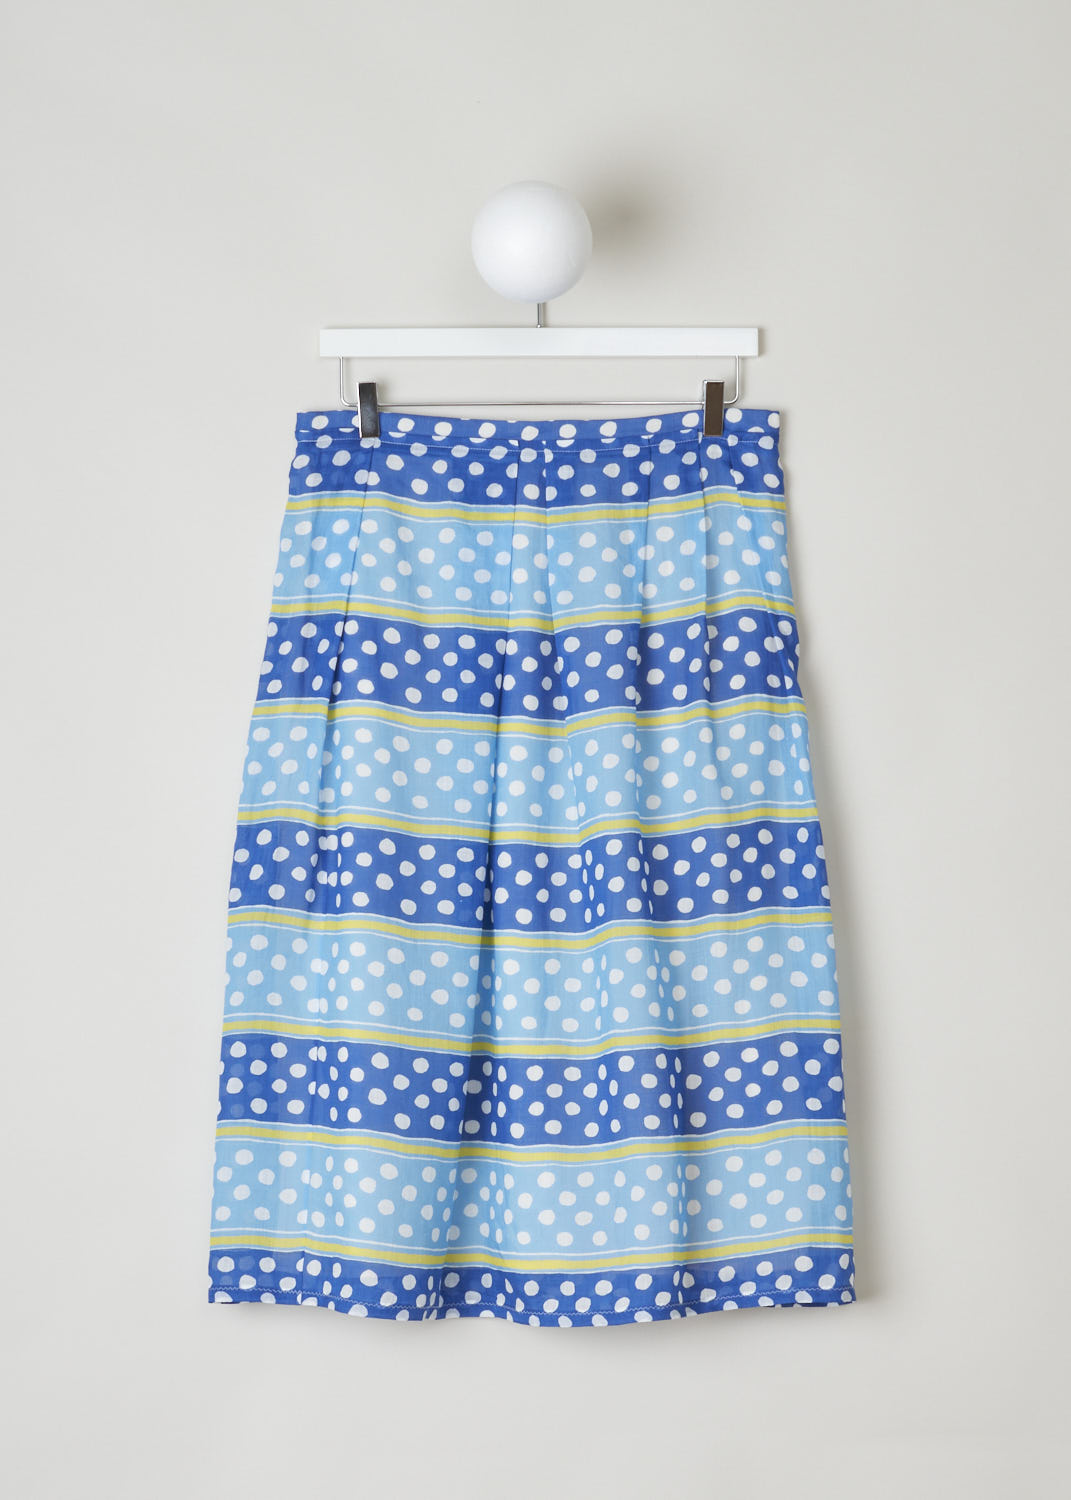 MARNI, COLORFUL DOTS AND STRIPES SKIRT, GOMA0420A0_UTR023_DSB57, Blue, Print, Front, This colorful dots and stripes midi skirt is pleated throughout. The skirt has a layered hem around the waist with white stitching. In the back the concealed zipper and snap closure can be found.